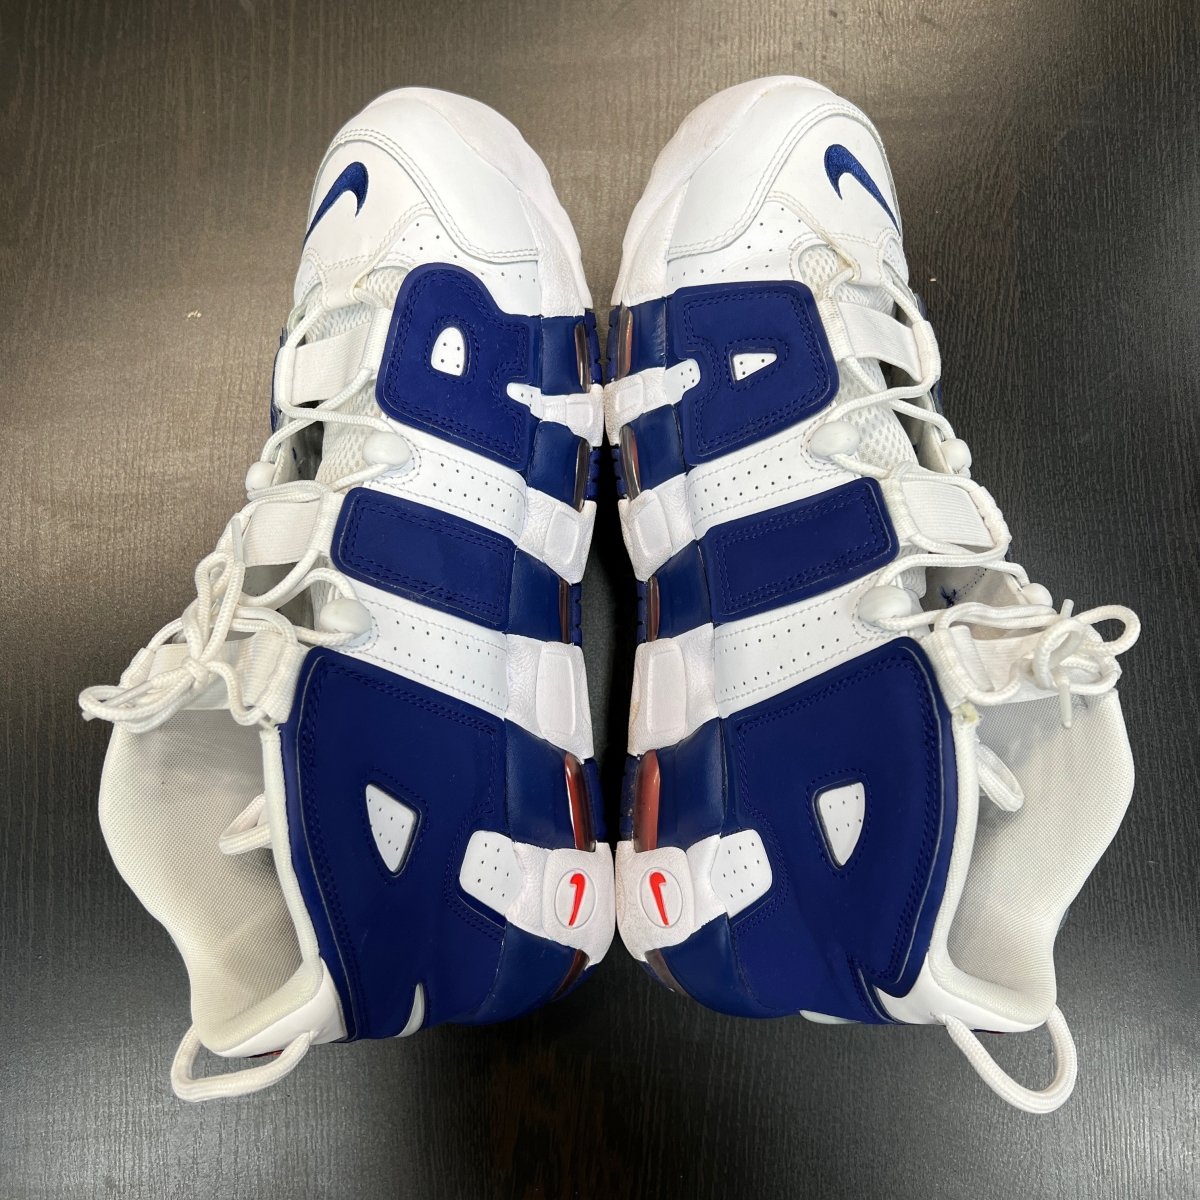 Air More Uptempo 'Knicks' - Gently Enjoyed (Used) Men 13 - Mid Sneaker - Jawns on Fire Sneakers & Streetwear